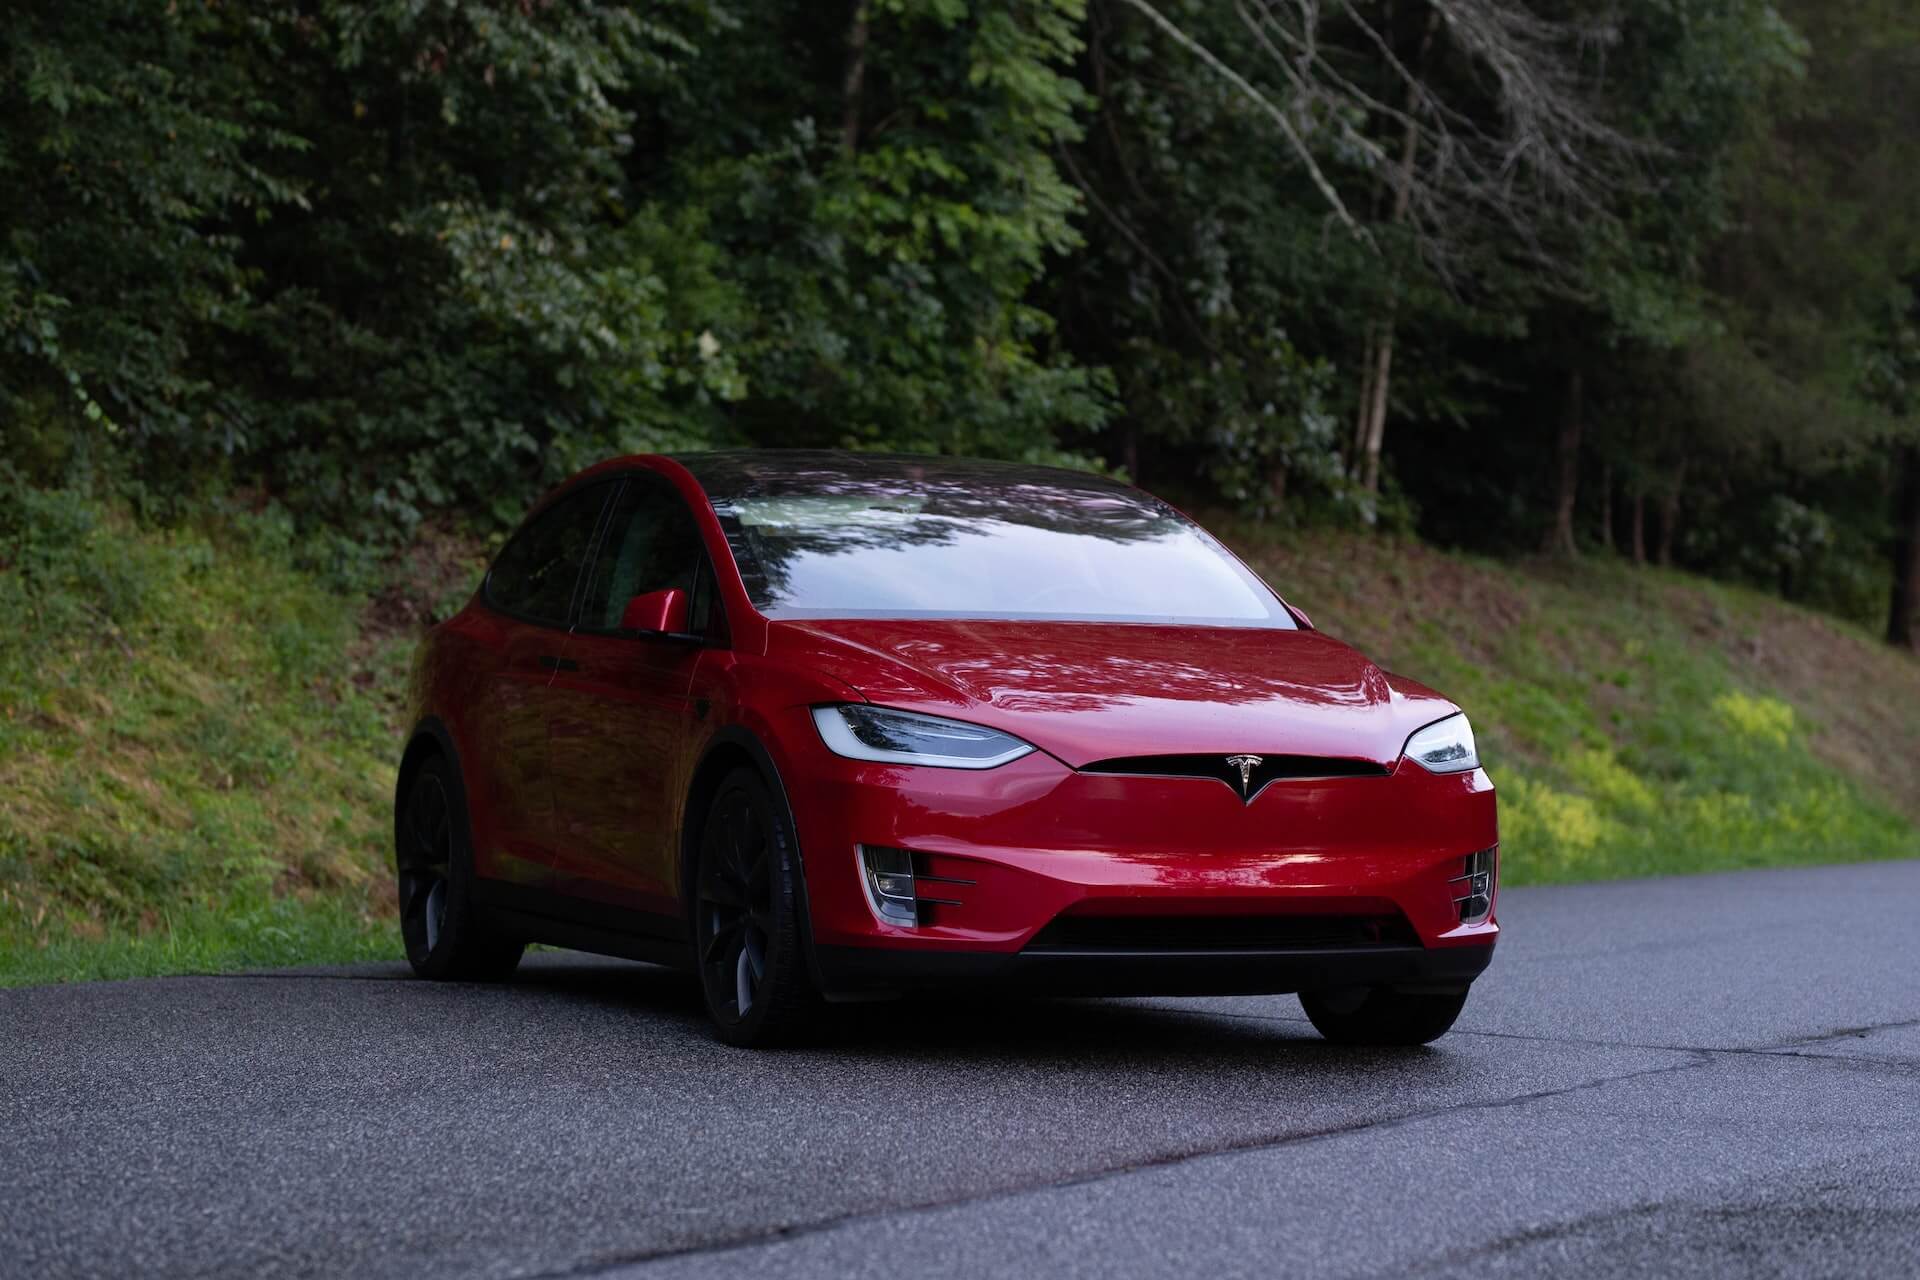 Schreiber, Siminou Lead Lawsuit Against Tesla as "Self-Driving" Death Toll on the Rise